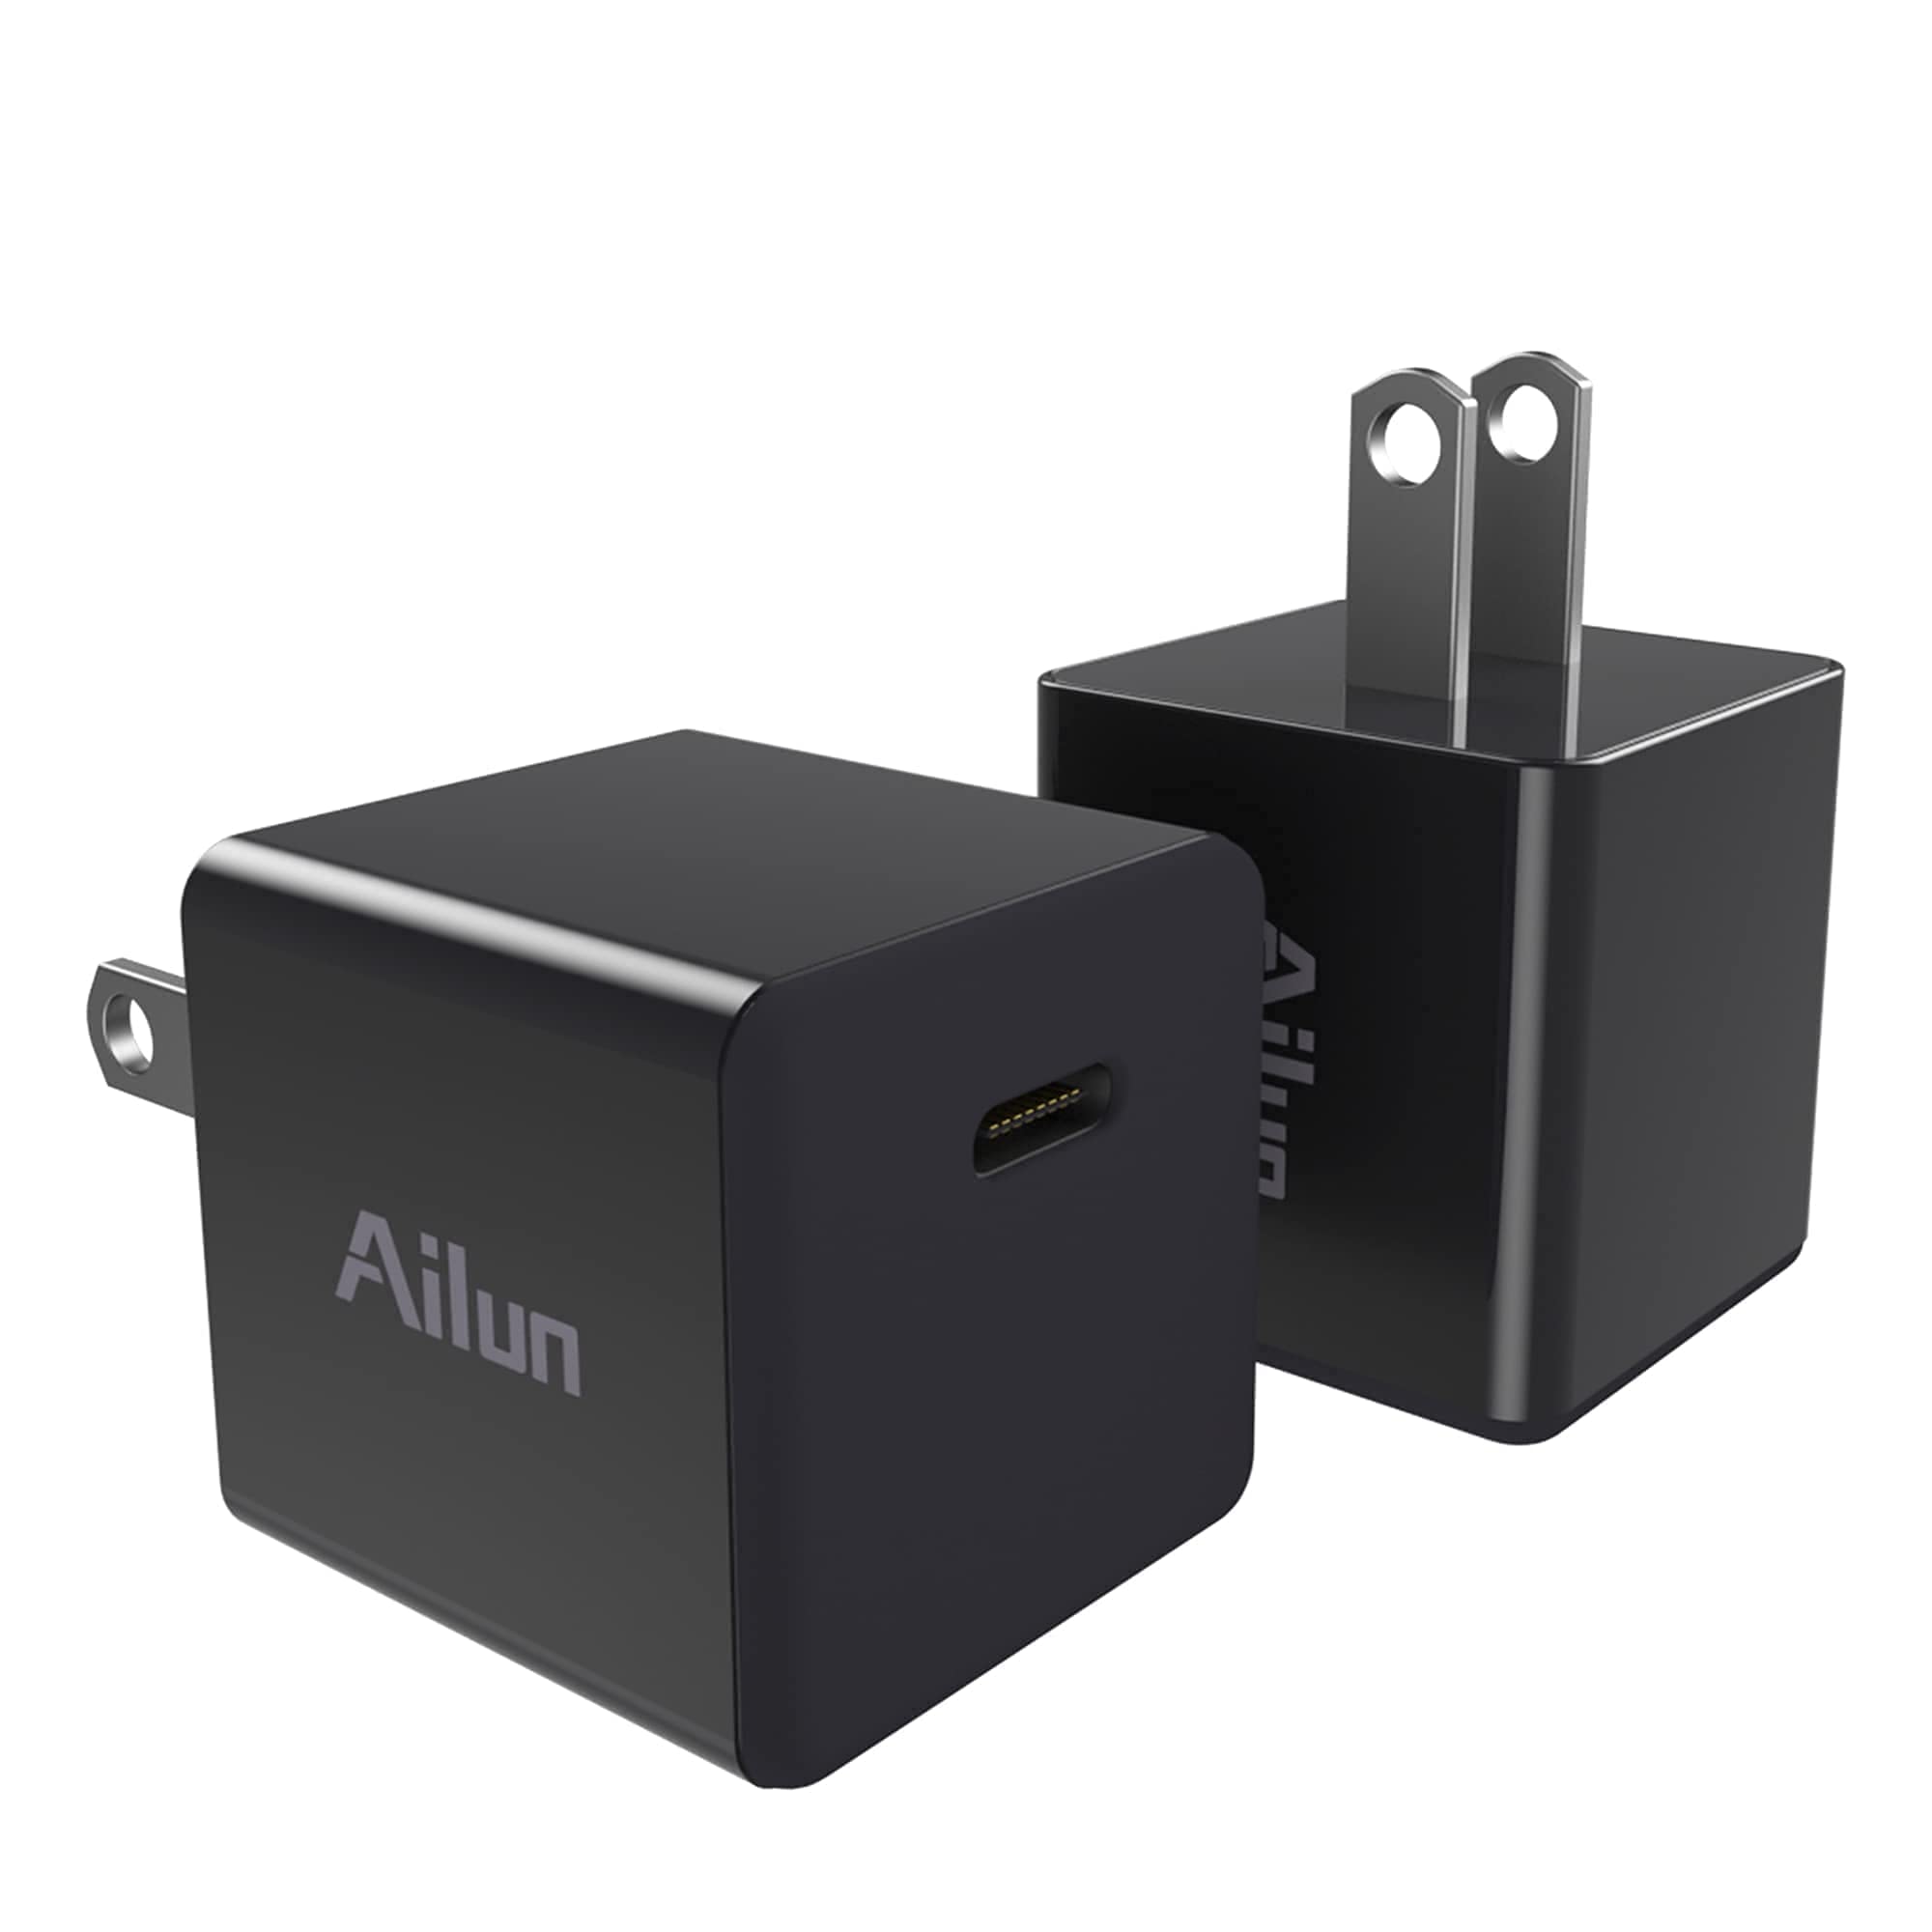 Ailun 2Pack 20W USB C Power Adapter,PD Port Thumb Wall Charger Block Fast Charge and USB C to Lighting Cable 2Pack and USB C Female to USB A Male Adapter with Keychain 2Pack